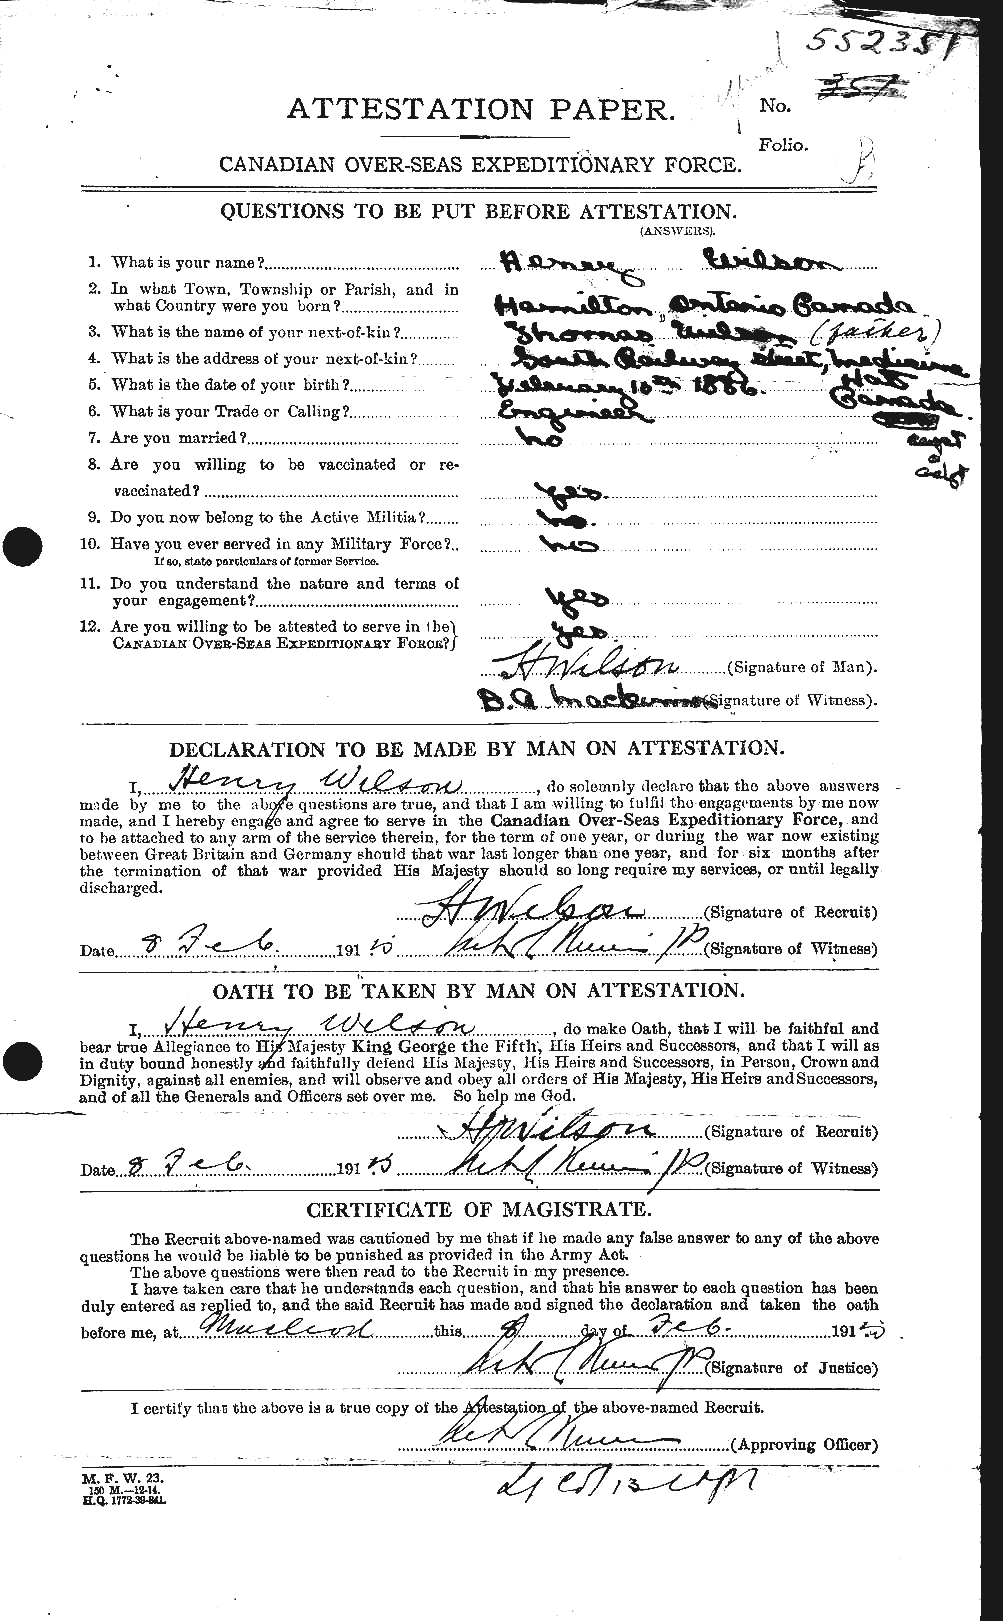 Personnel Records of the First World War - CEF 679499a